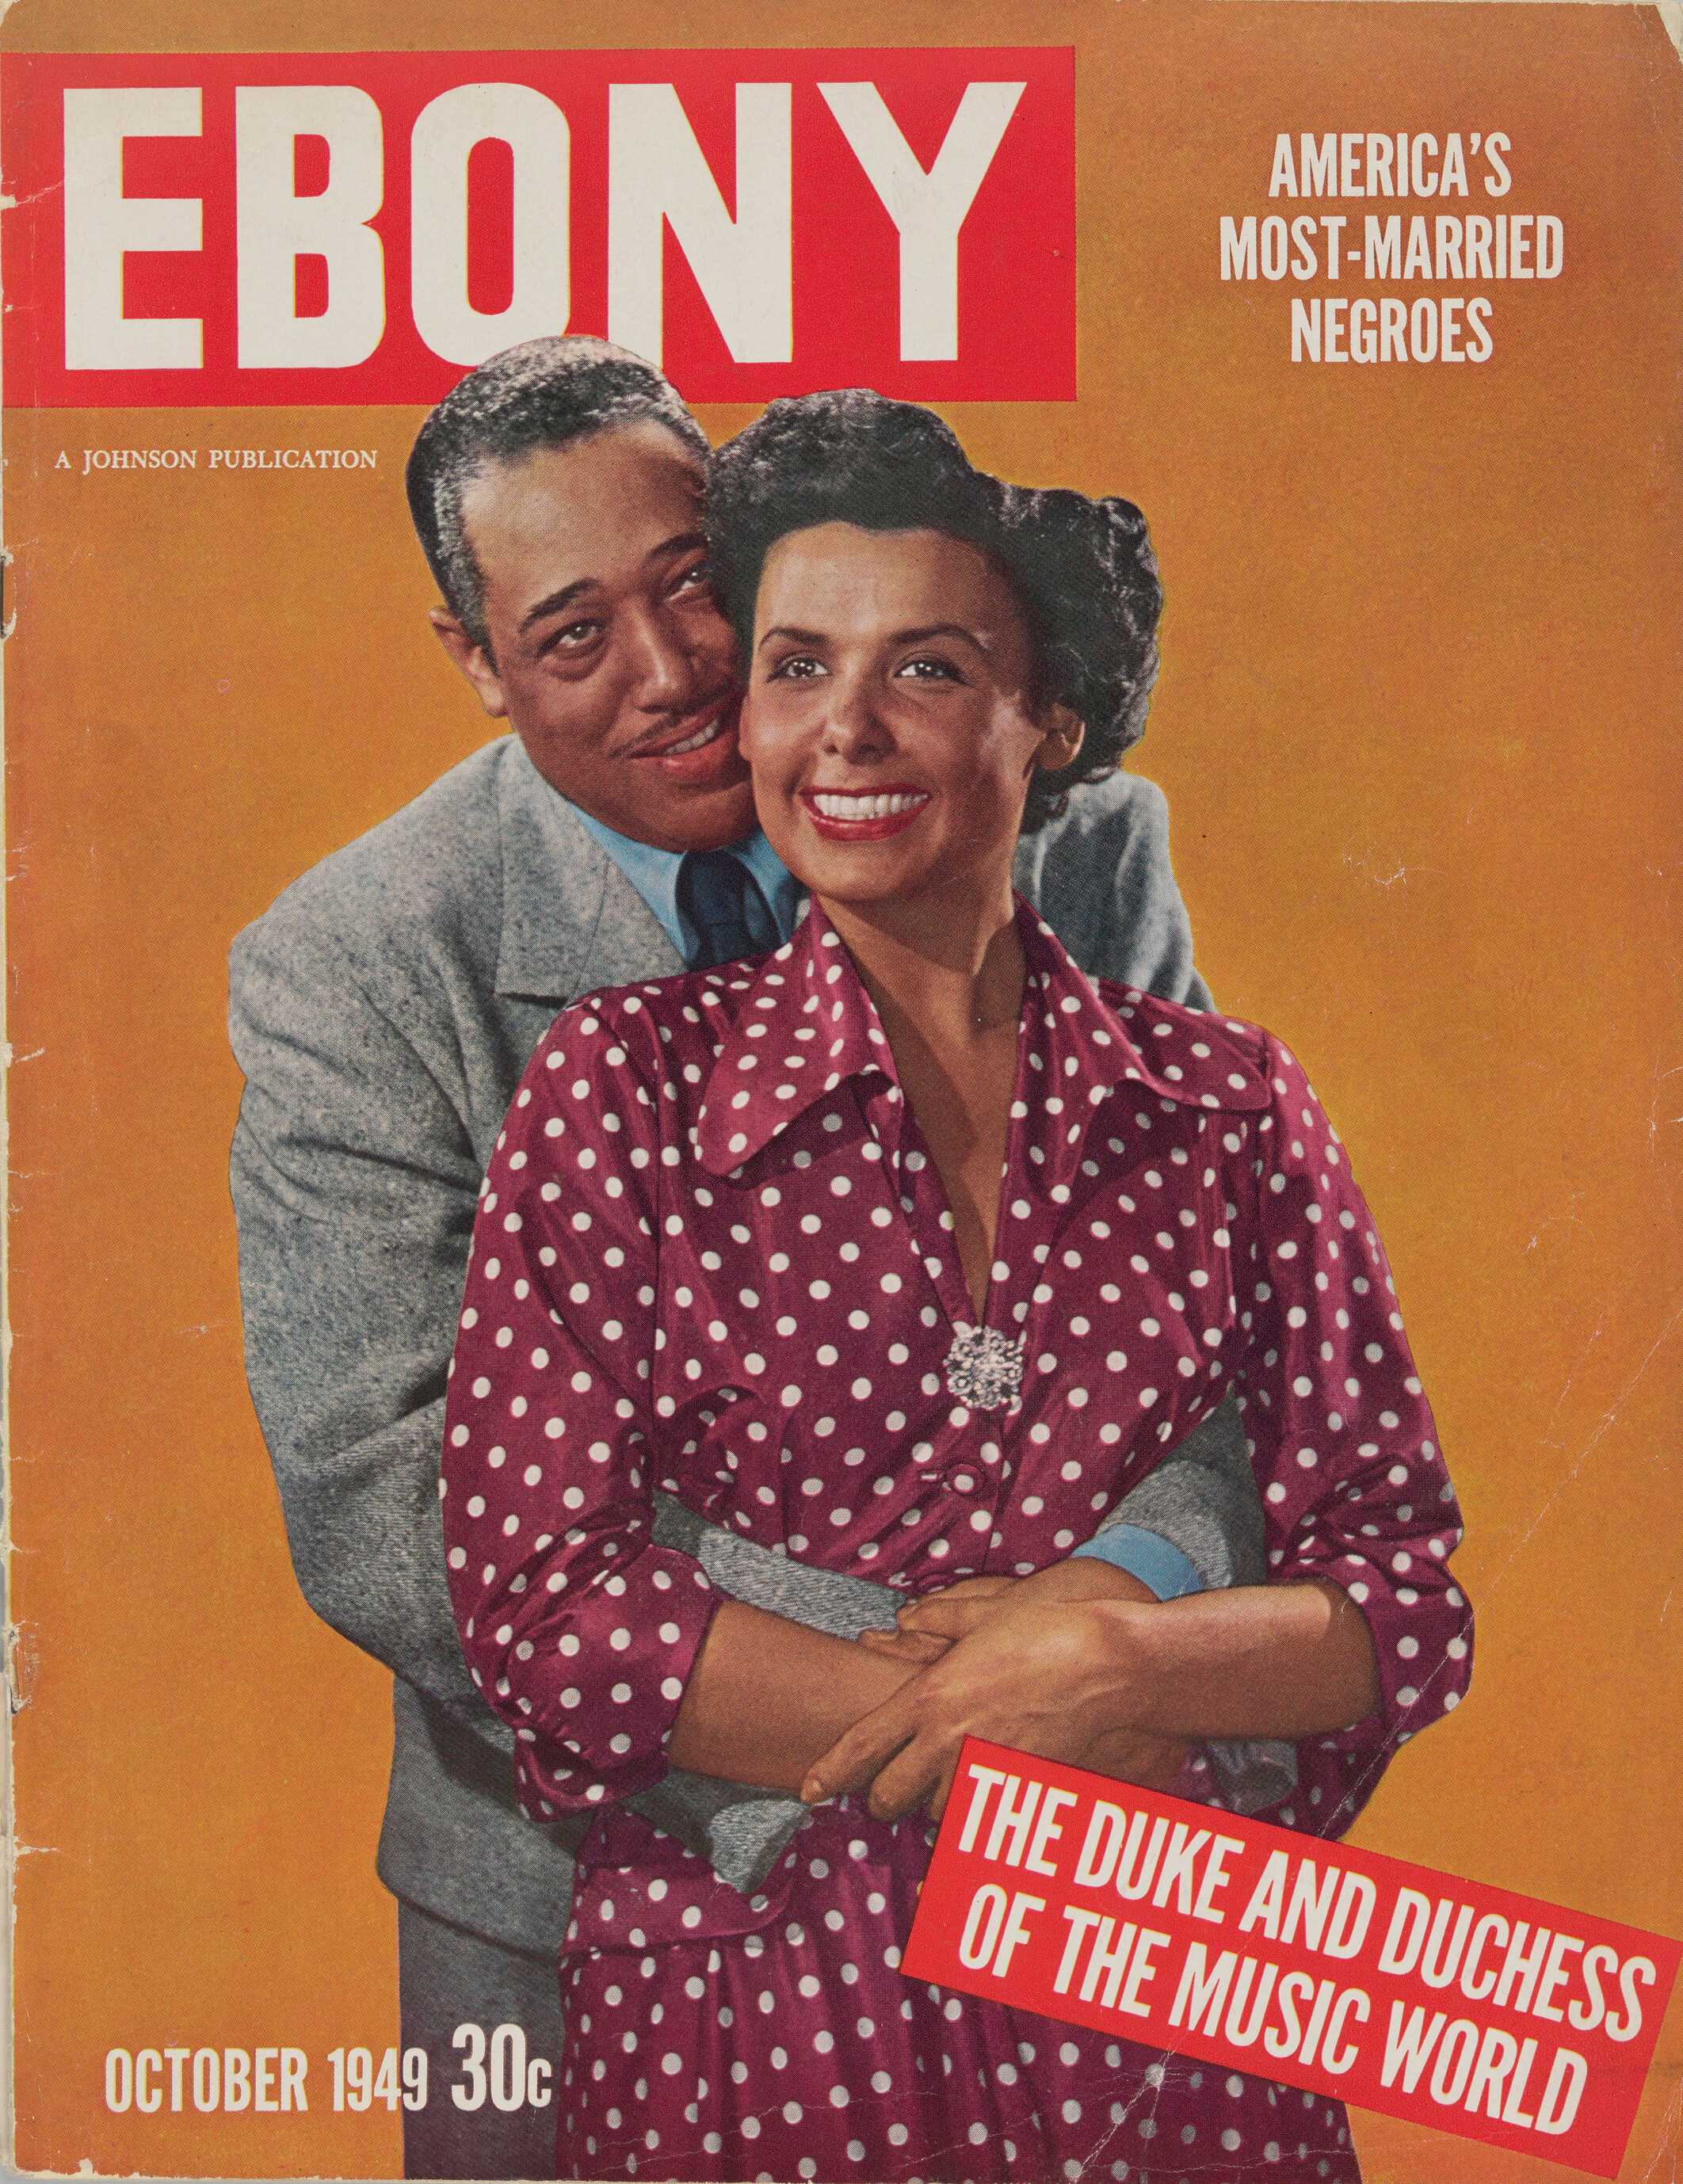 An issue of Ebony Magazine from October 1949. The cover features Lena Horne and Duke Ellington against an orange background.